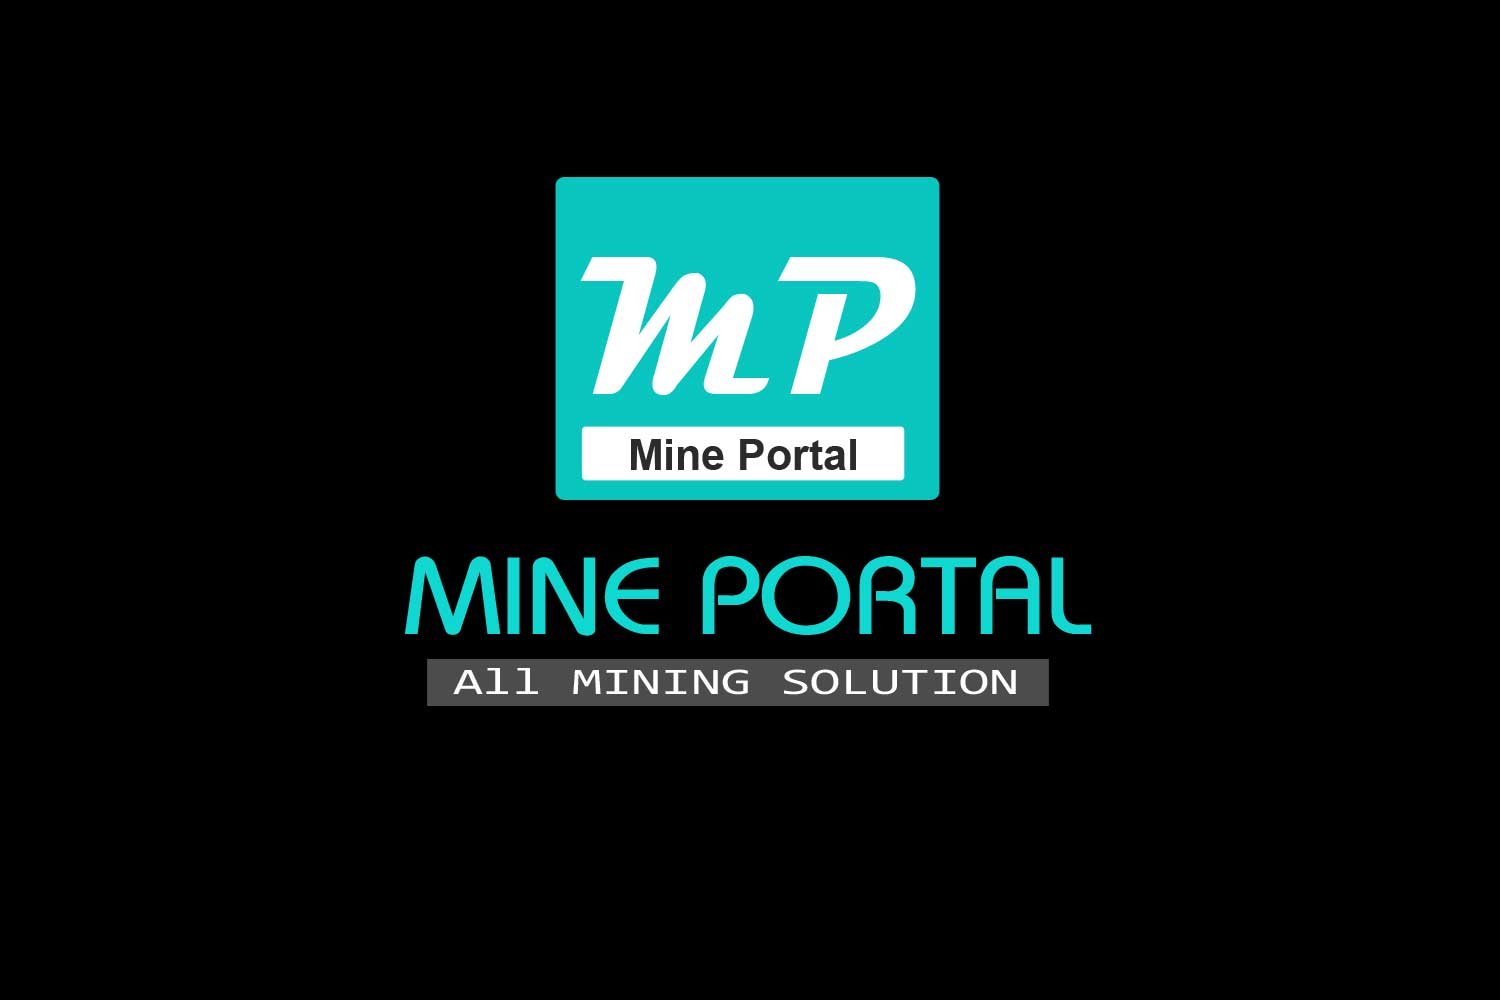 PPTs ON MISCELLANEOUS MINING TOPICS